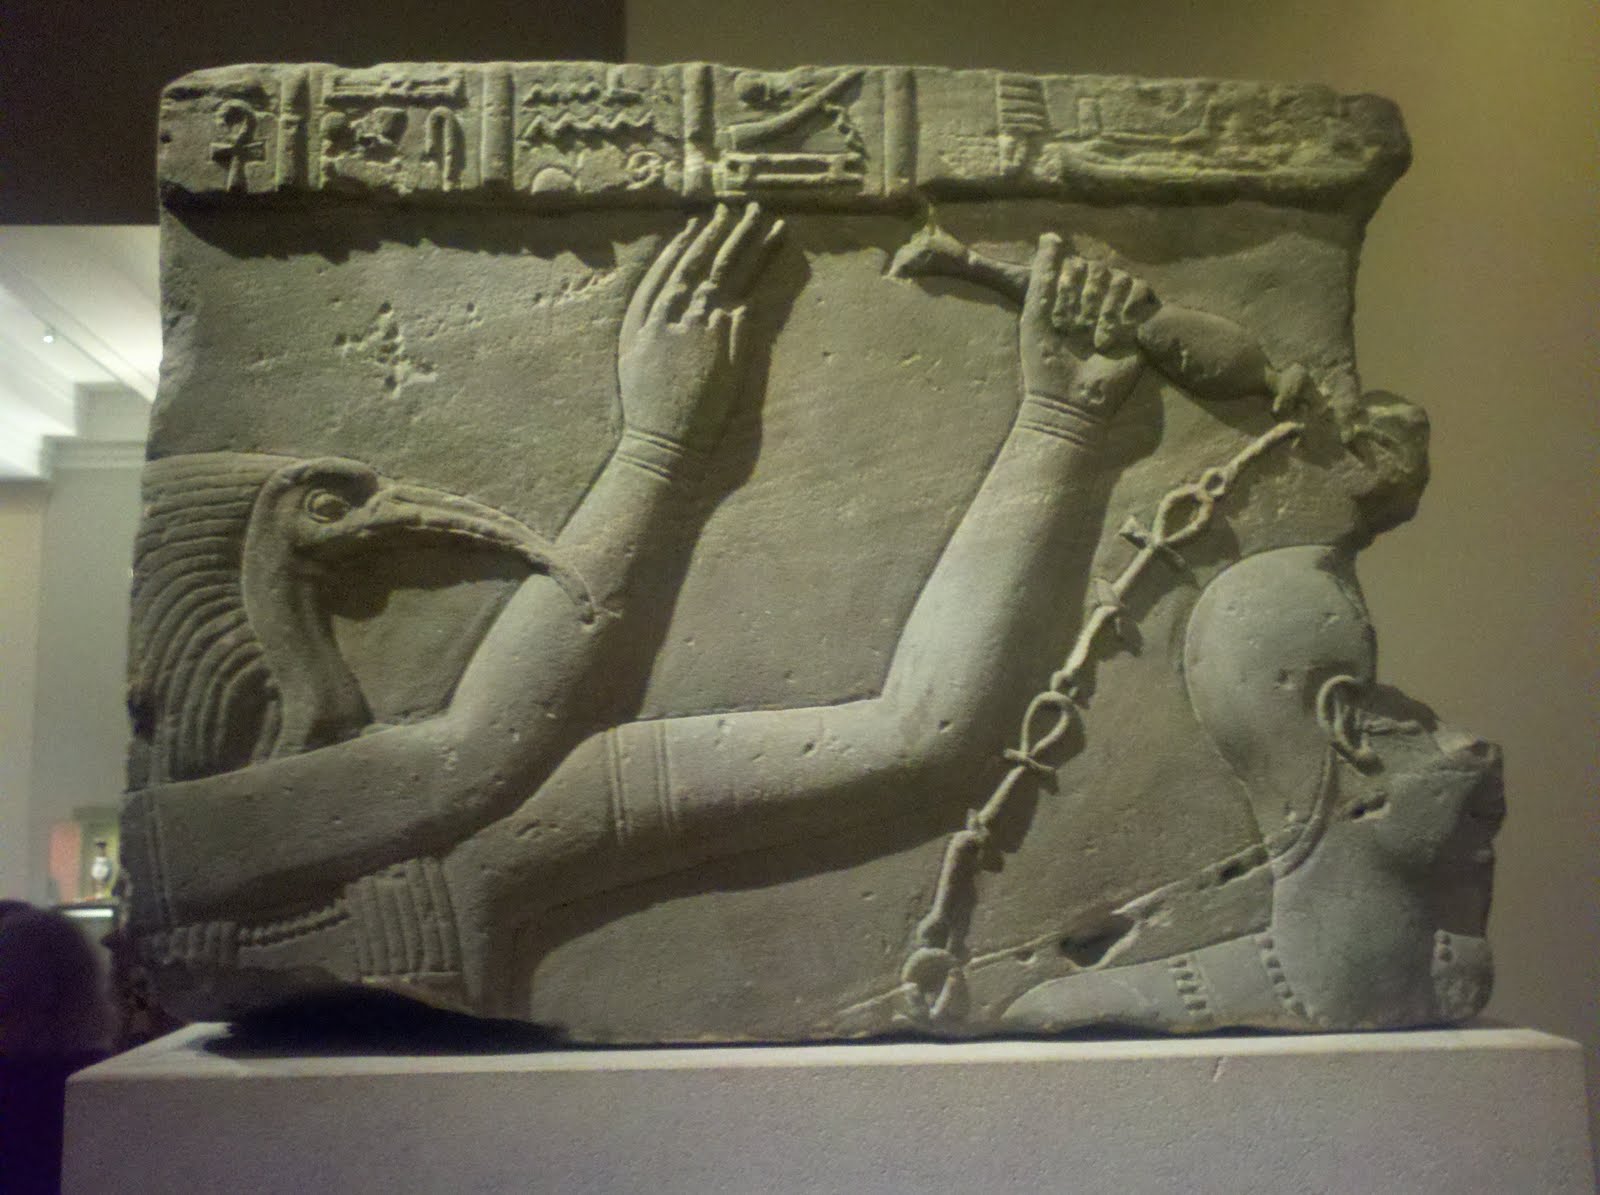 15 - Thoth giving Horus a baptism